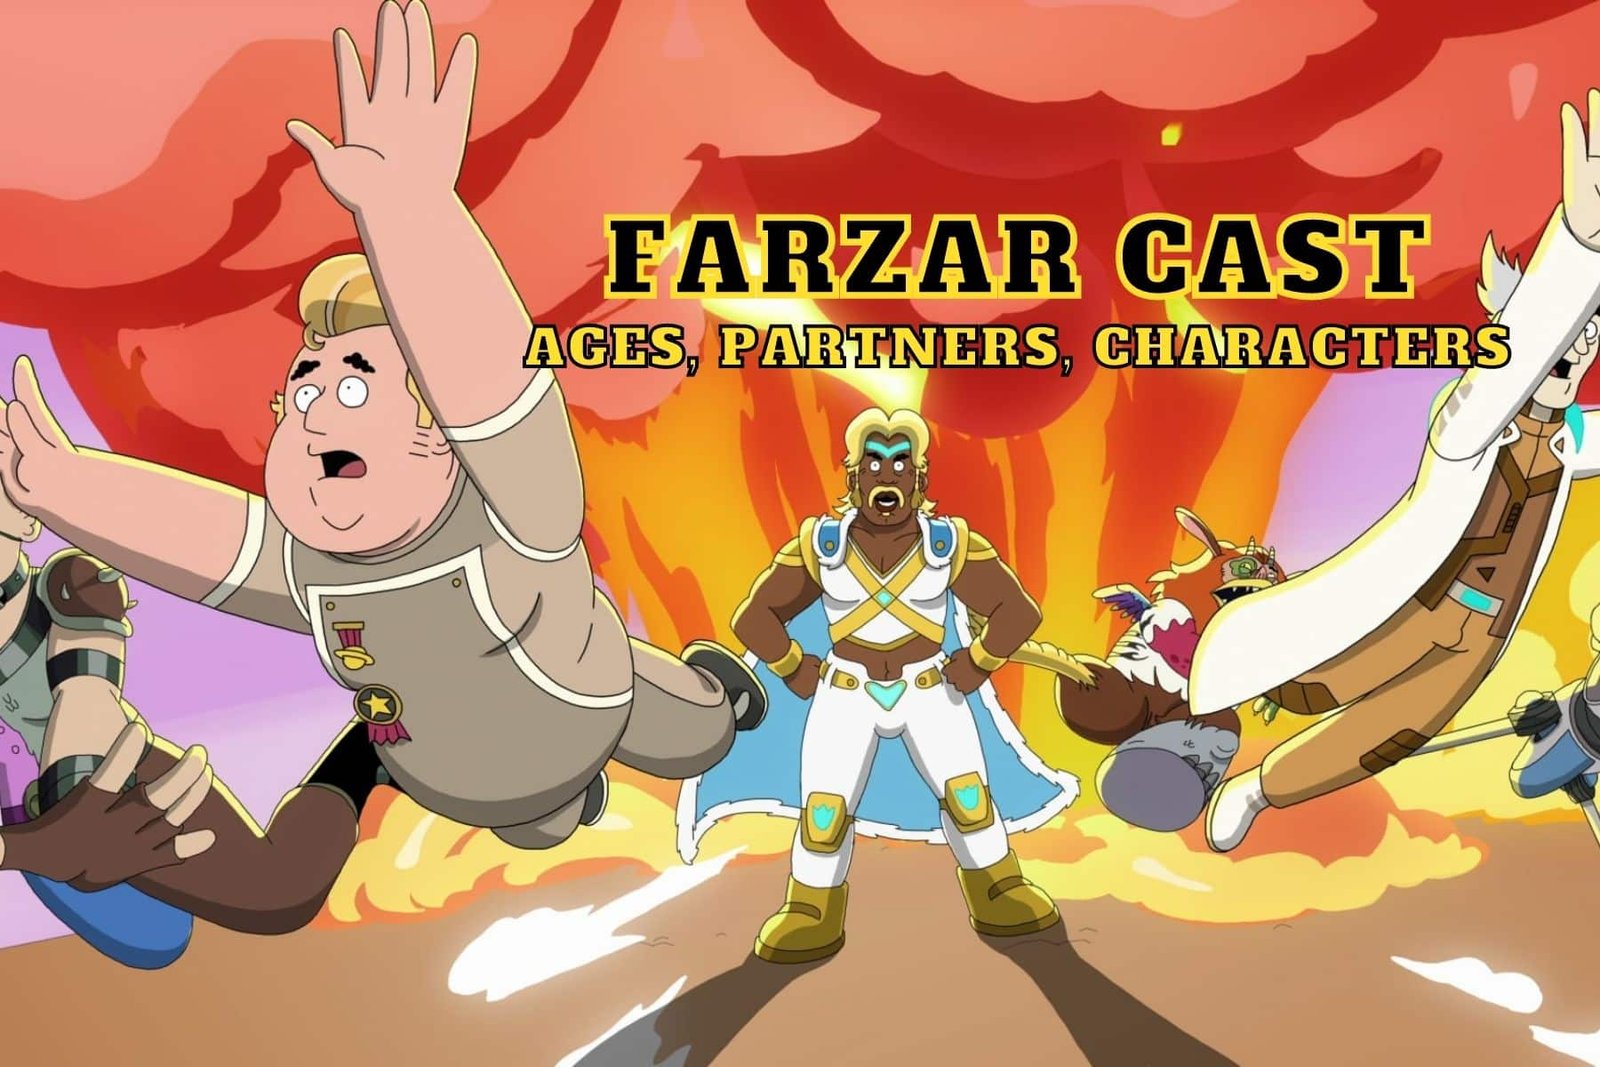 Farzar Cast - Ages, Partners, Characters